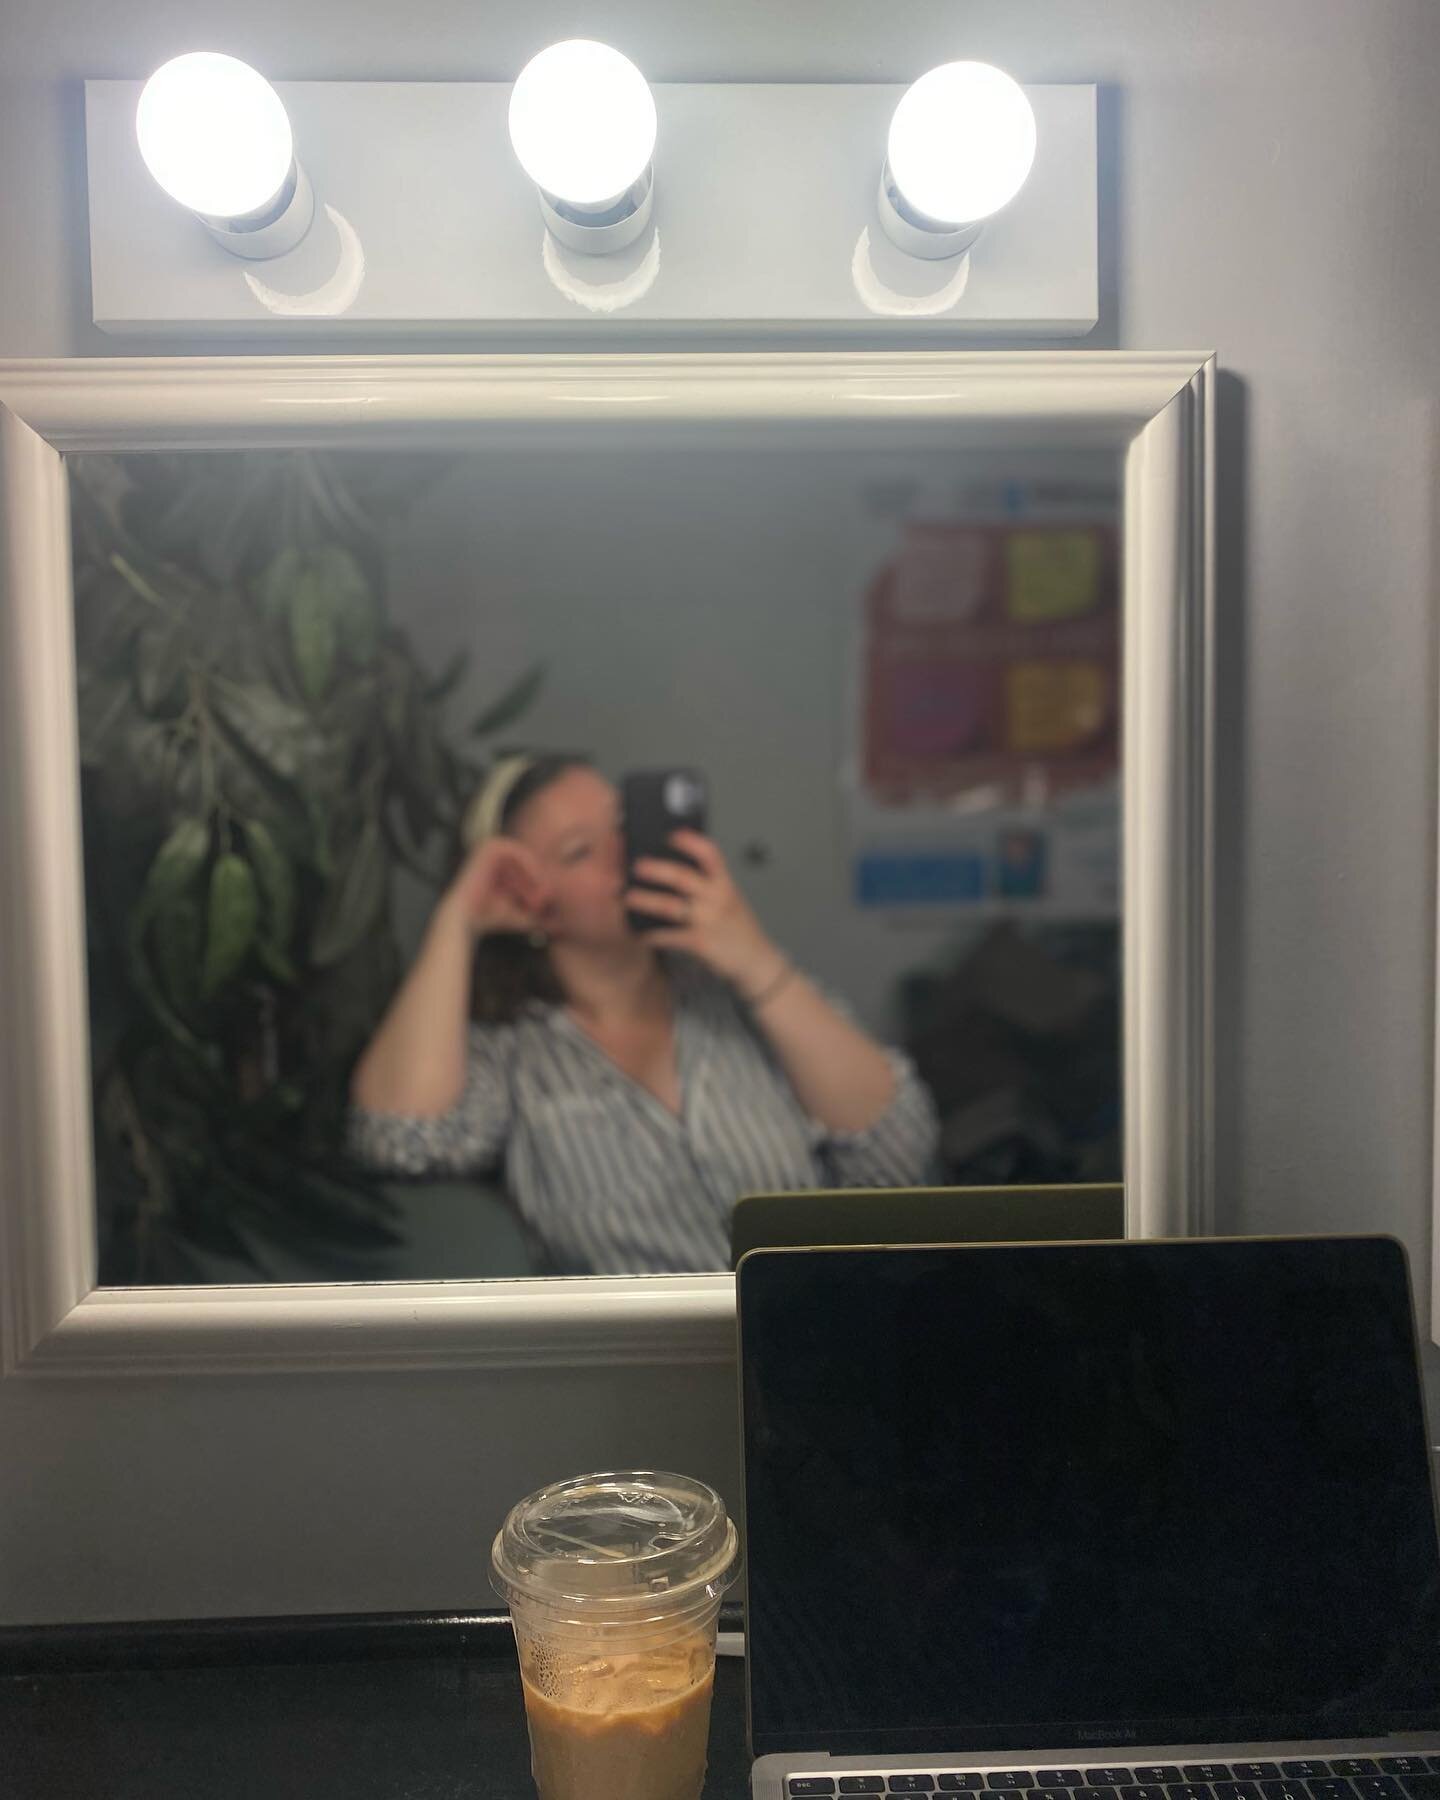 Getting work done in a dressing room just hits different. It feels like home. Where does everyone else love to practice or do work? 
.
#theatrelife #auditioncheckup #auditioning #audition #auditions #theatrekid #dressingroom #broadwaylights #nyctheat